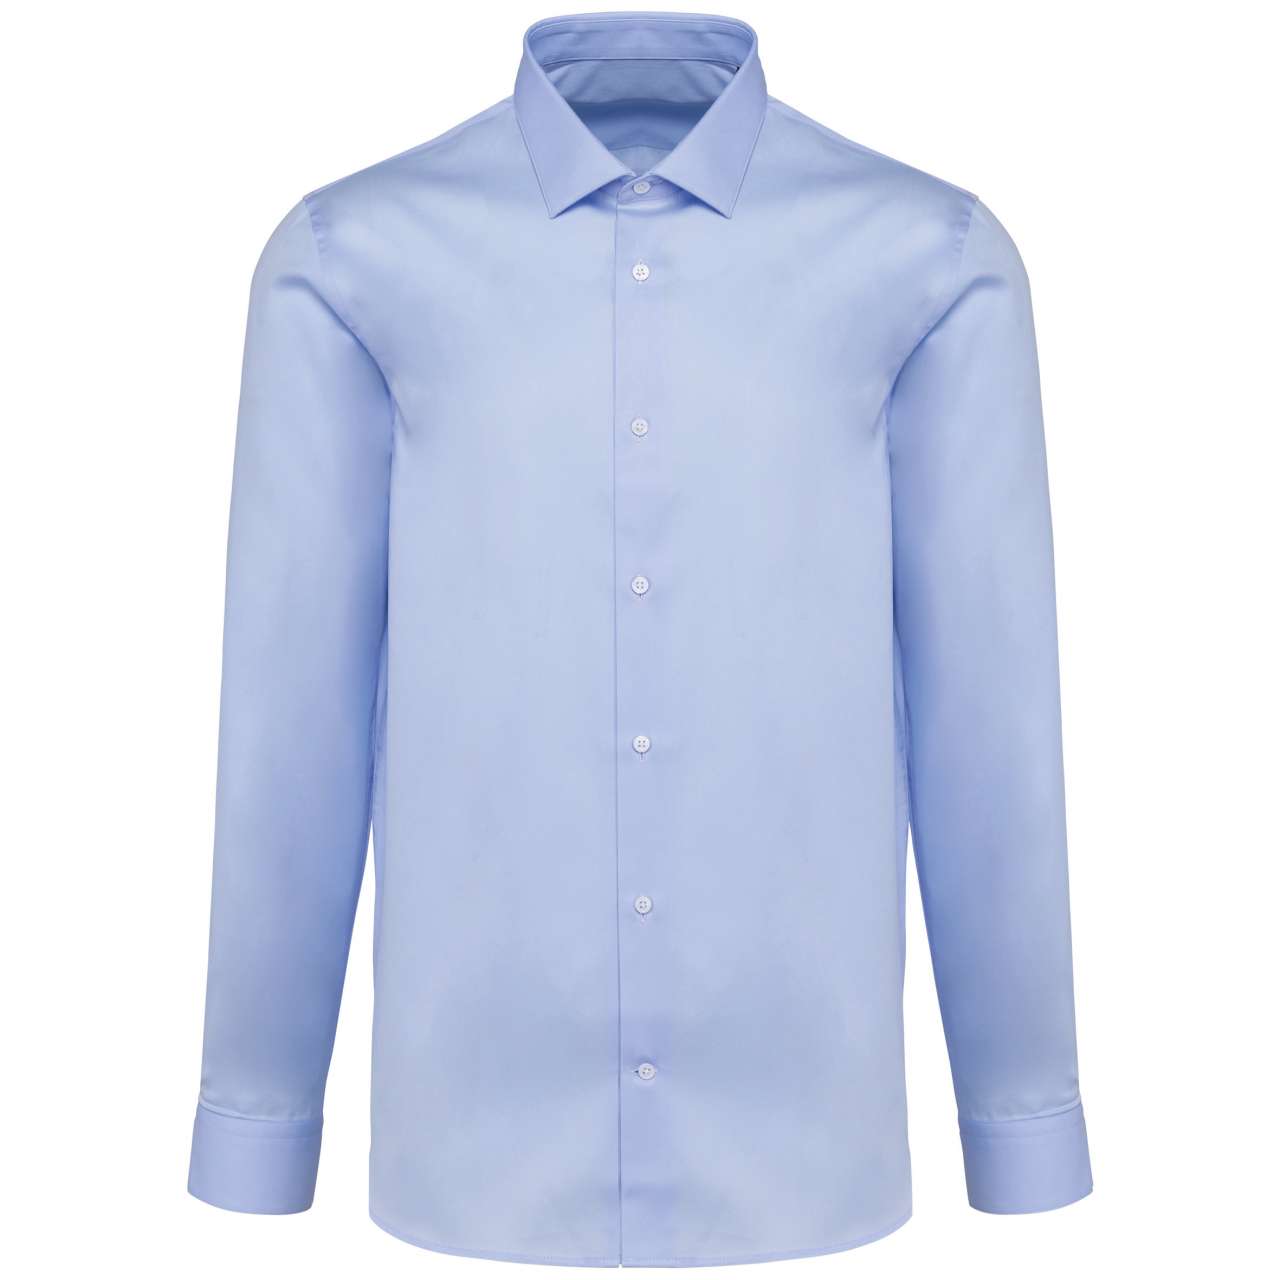 MEN'S PINPOINT OXFORD LONG-SLEEVED SHIRT s logom 